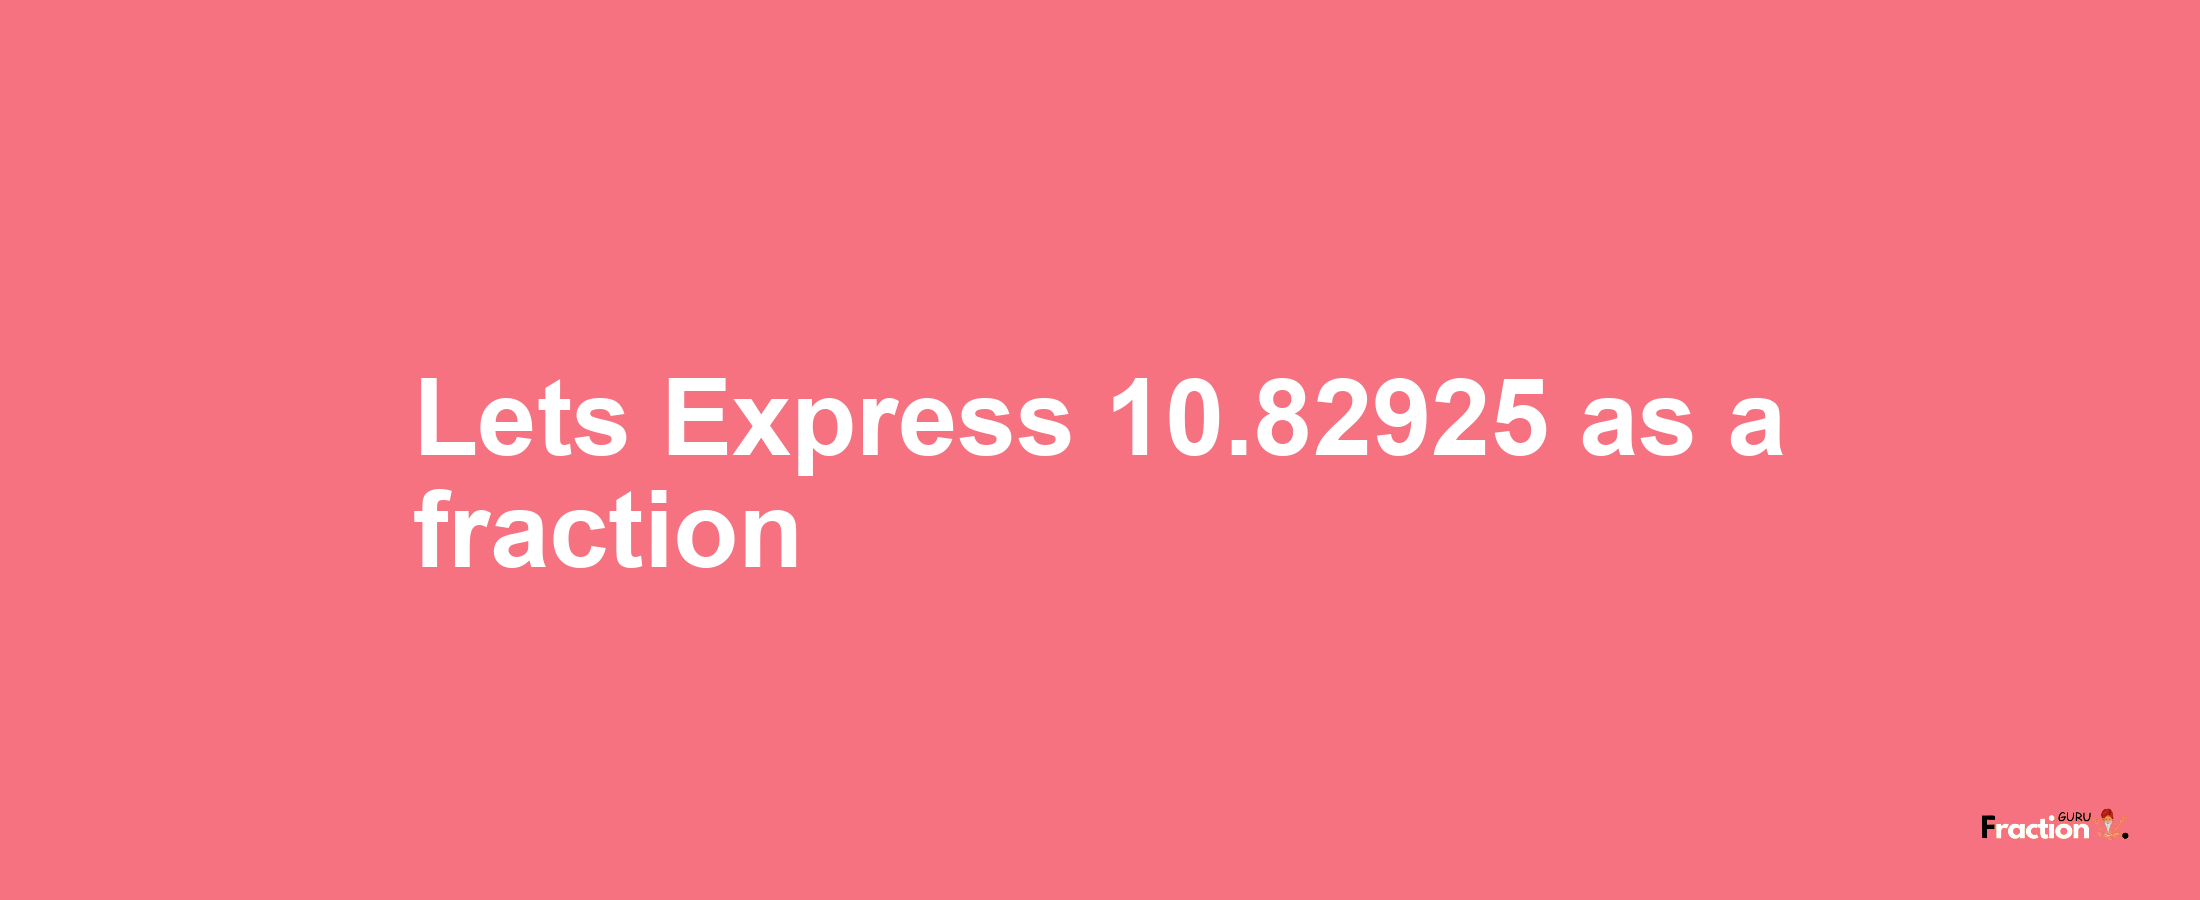 Lets Express 10.82925 as afraction